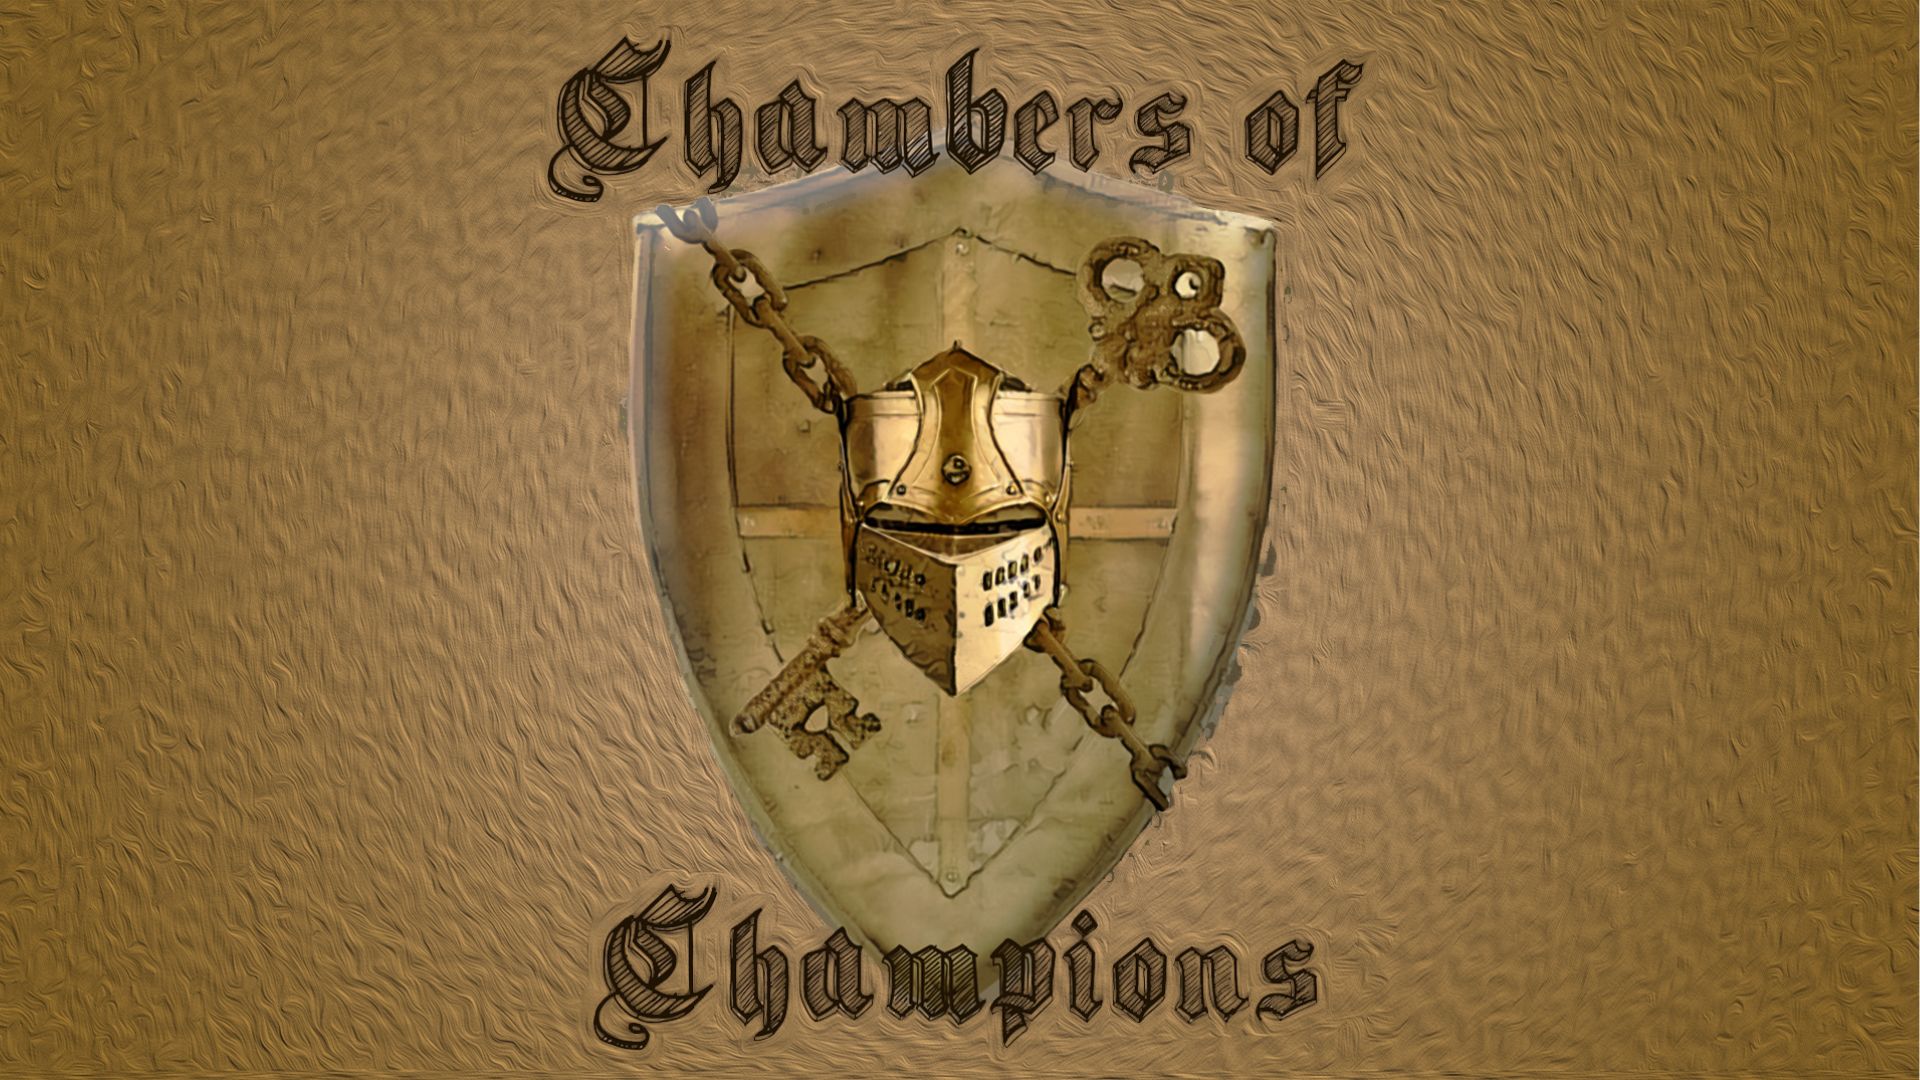 7 persons - Chambers of Champions